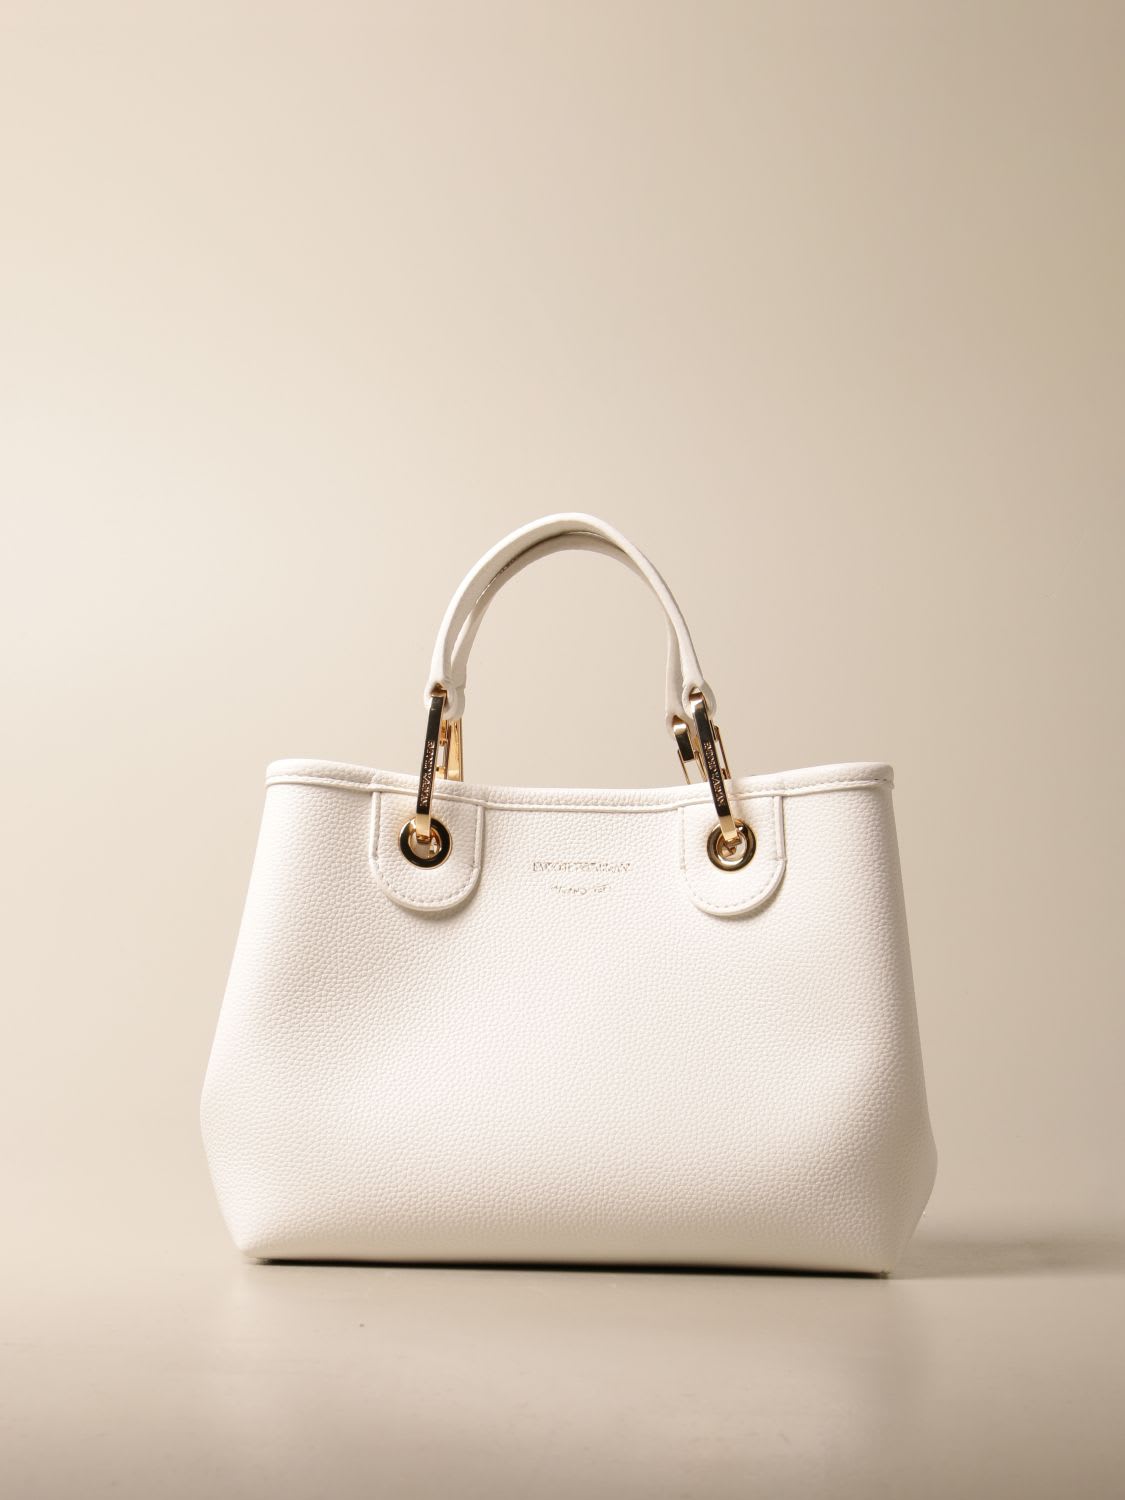 Emporio Armani Handbag In Textured Synthetic Leather In White